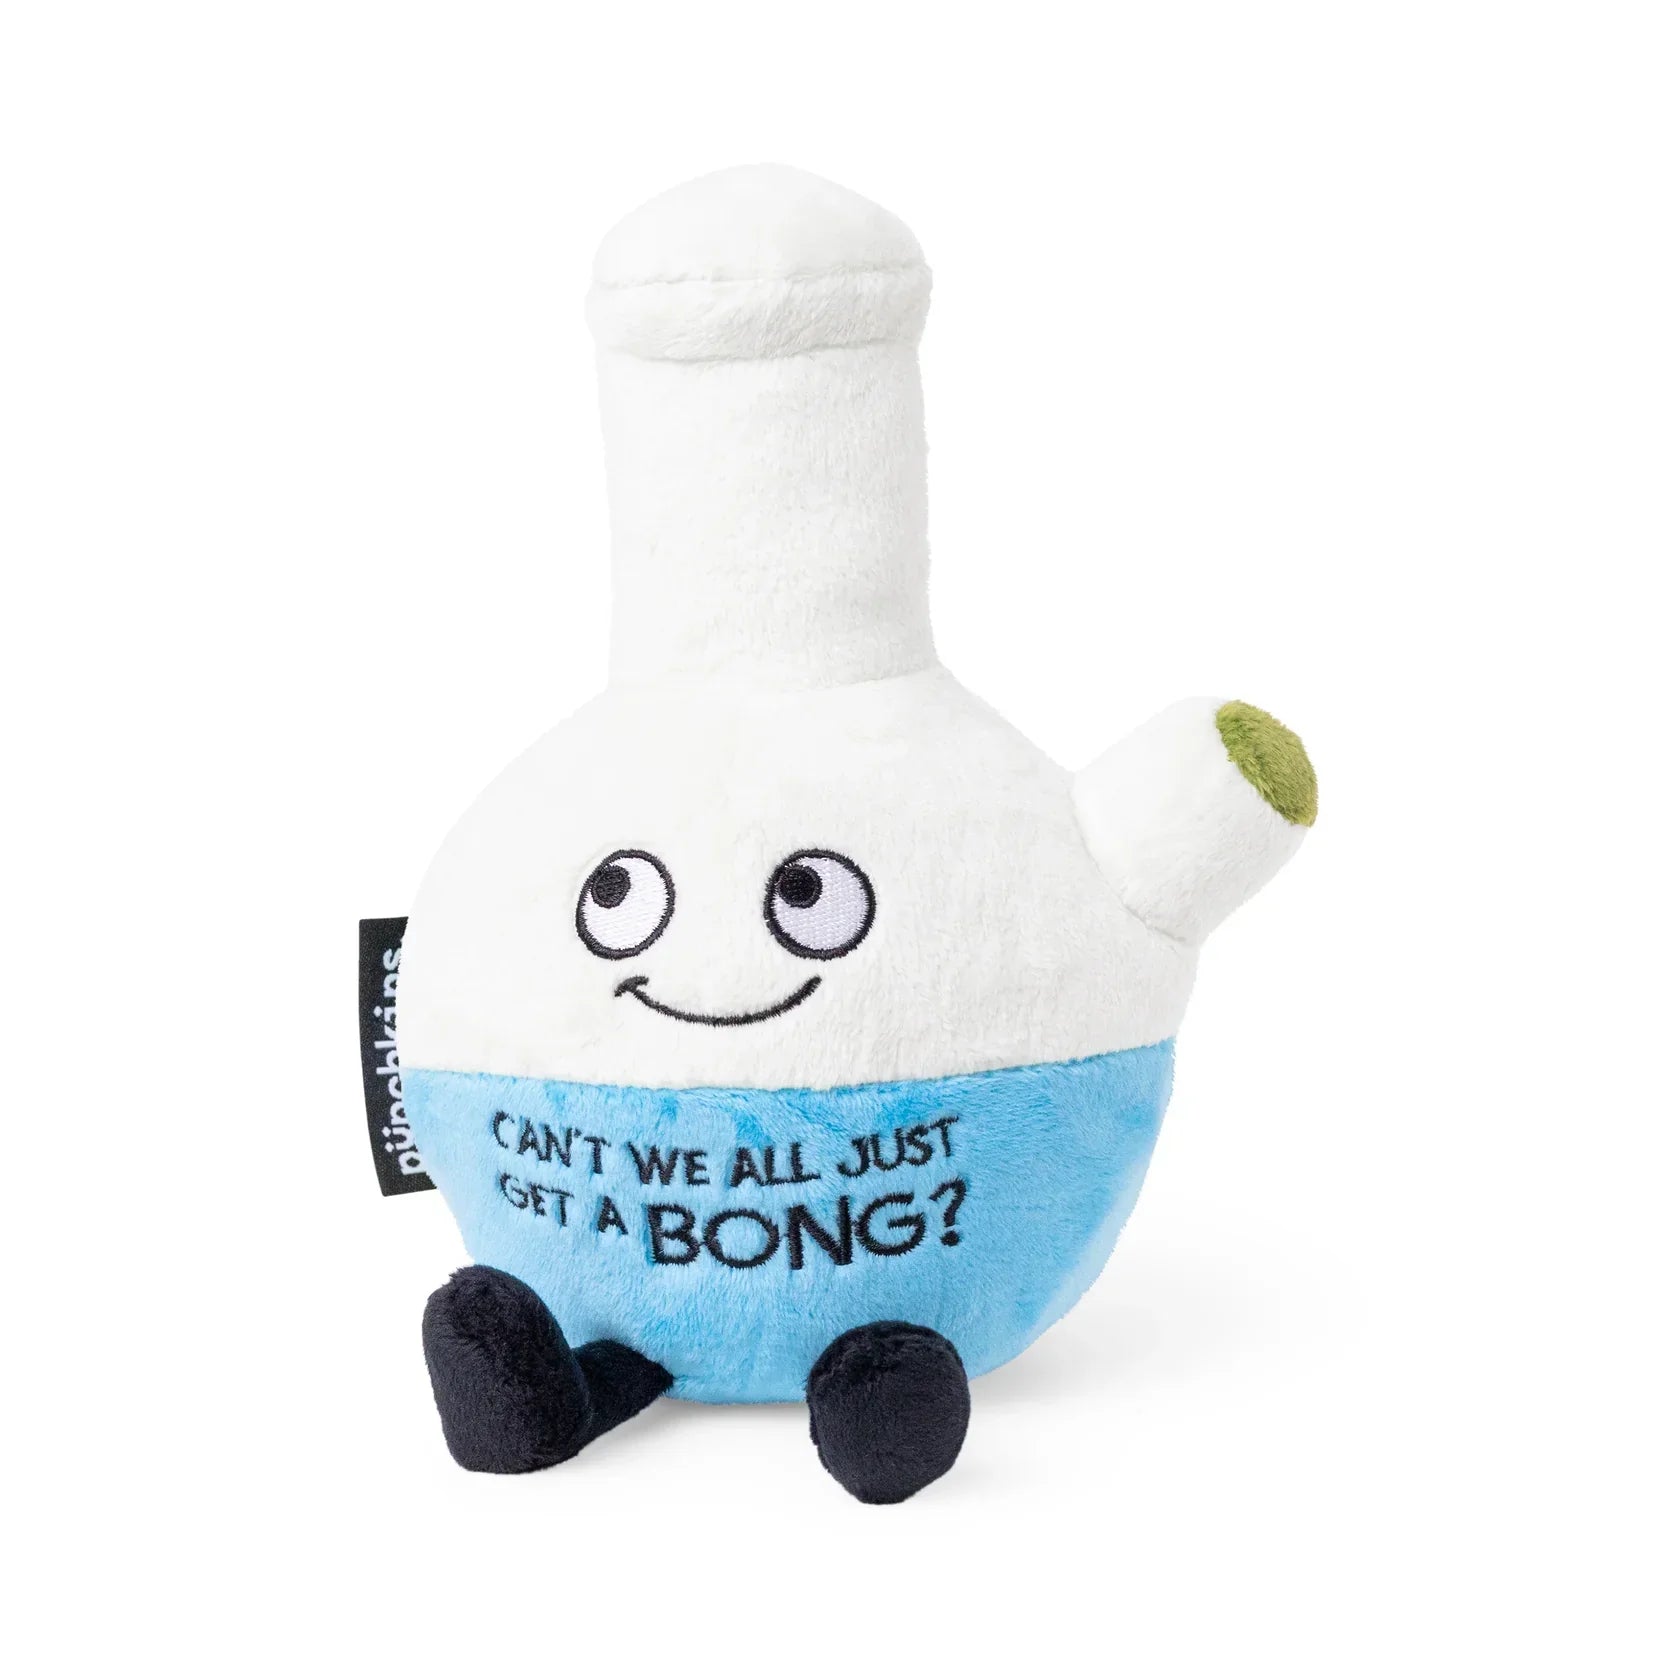 “Can’t We All Just Get A Bong?” Plush Bong The Plush Kingdom